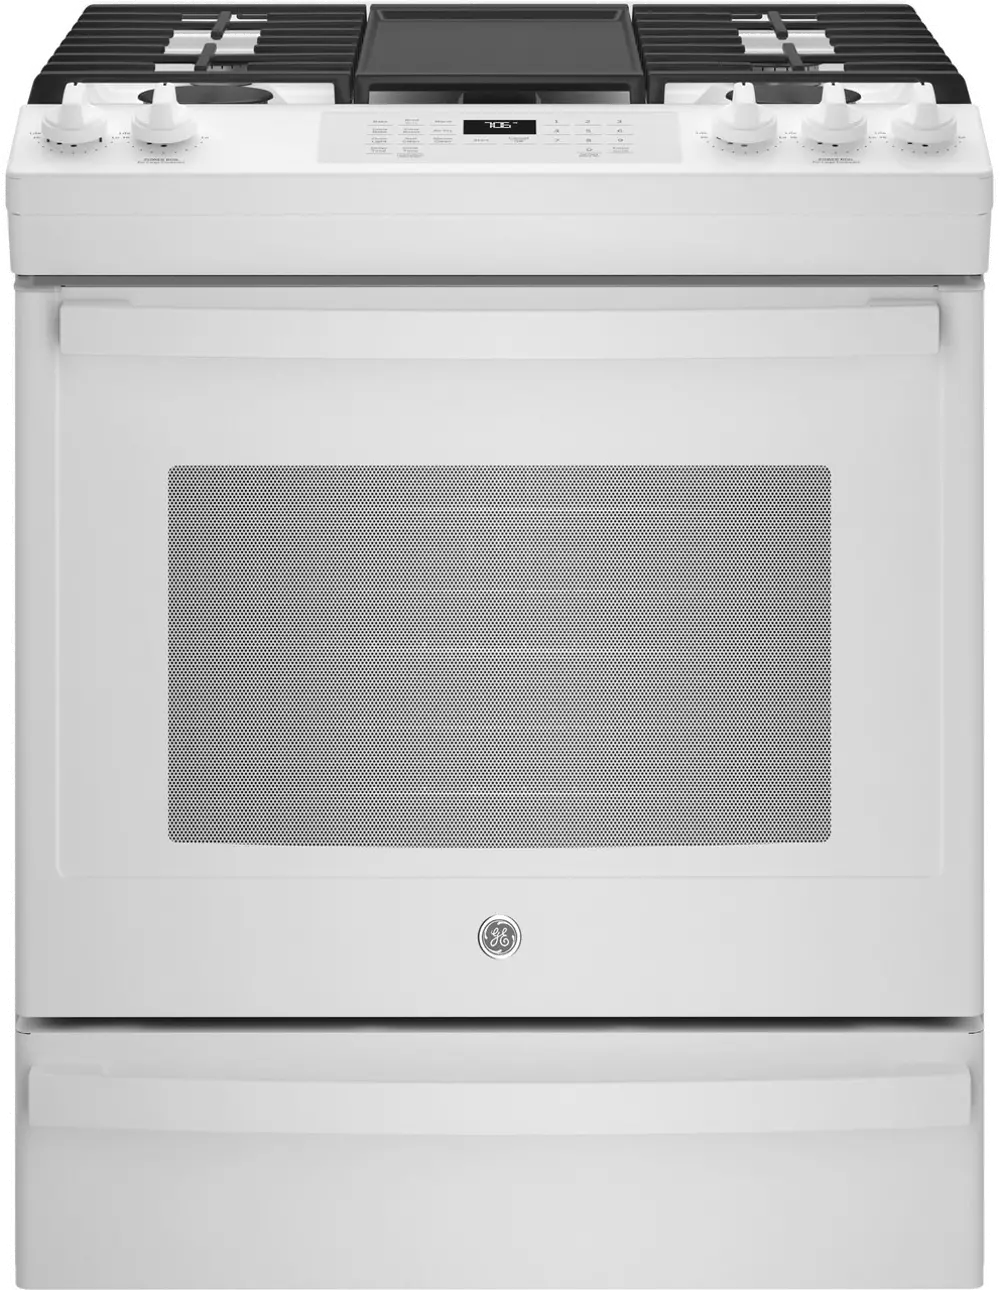 JGS760DPWW-OLD GE 30 Inch Slide In Gas Range with Convection and Air Fry - 5.6 cu. ft. White-1